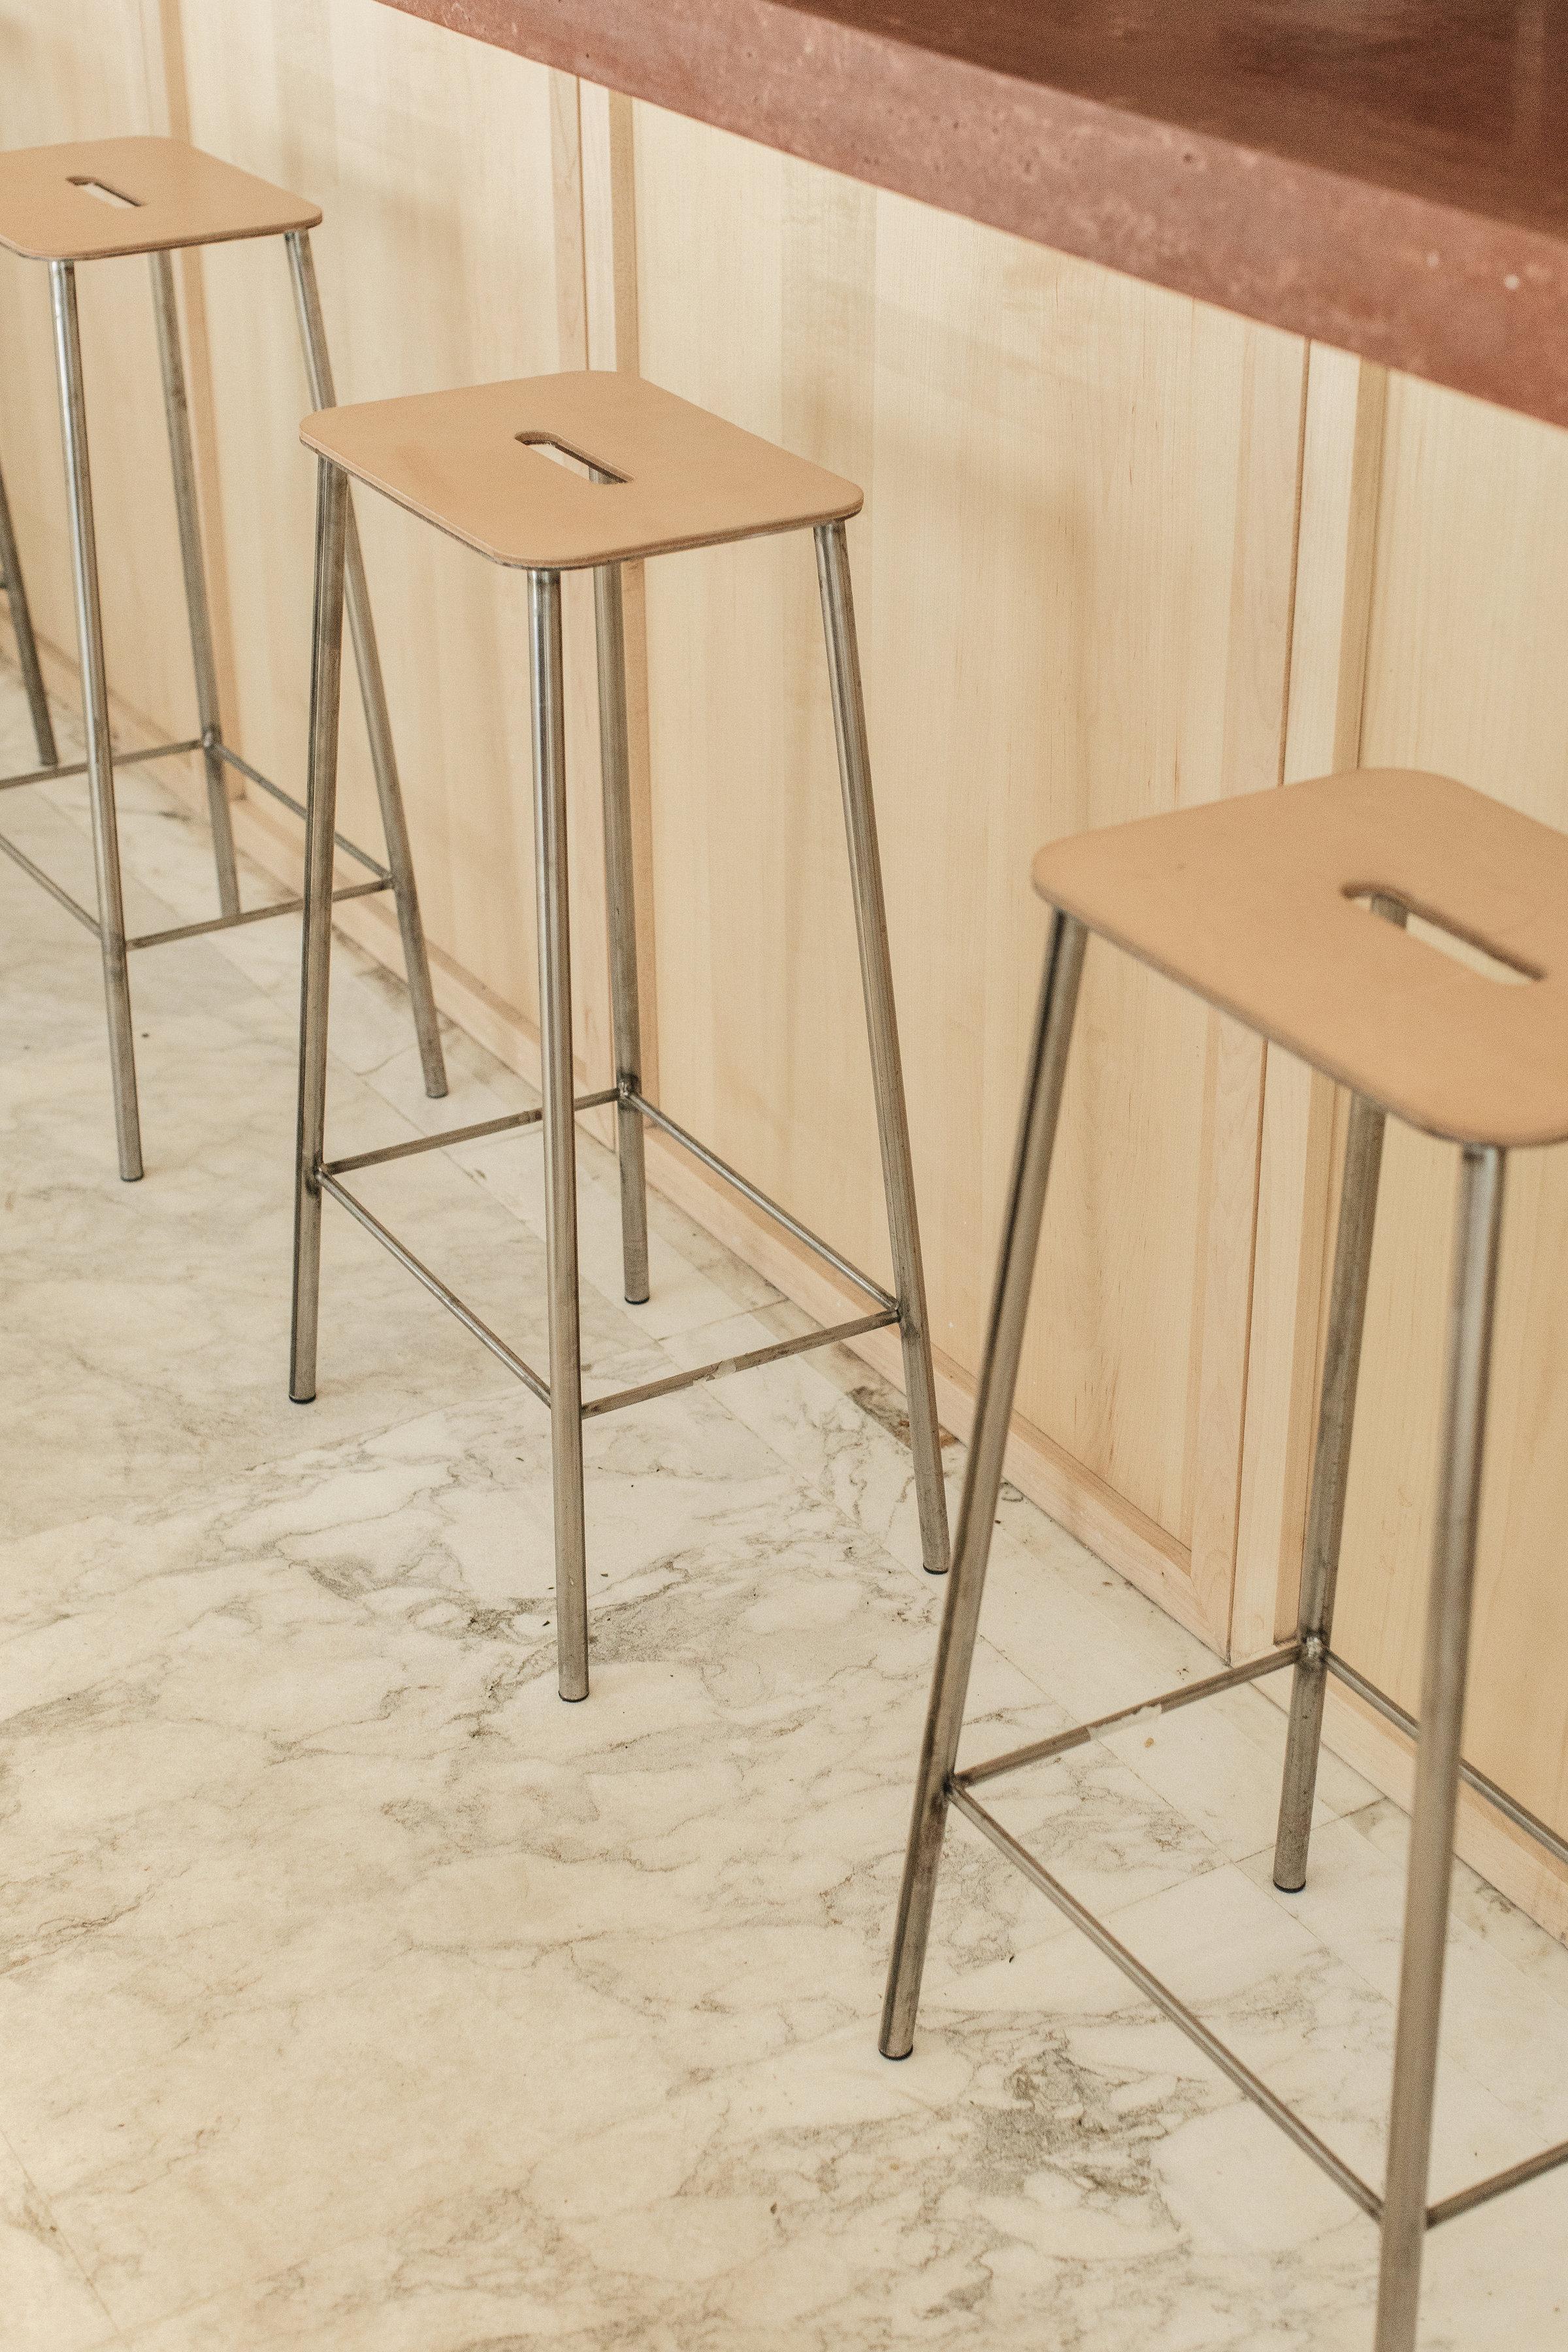 The Adam Stool collection is inspired by industrial design, an artist's studio, and a workshop. The functionality and simplicity of the design, combined with strong materials, give this stool a structural and utilitarian approach.

Features
– Height